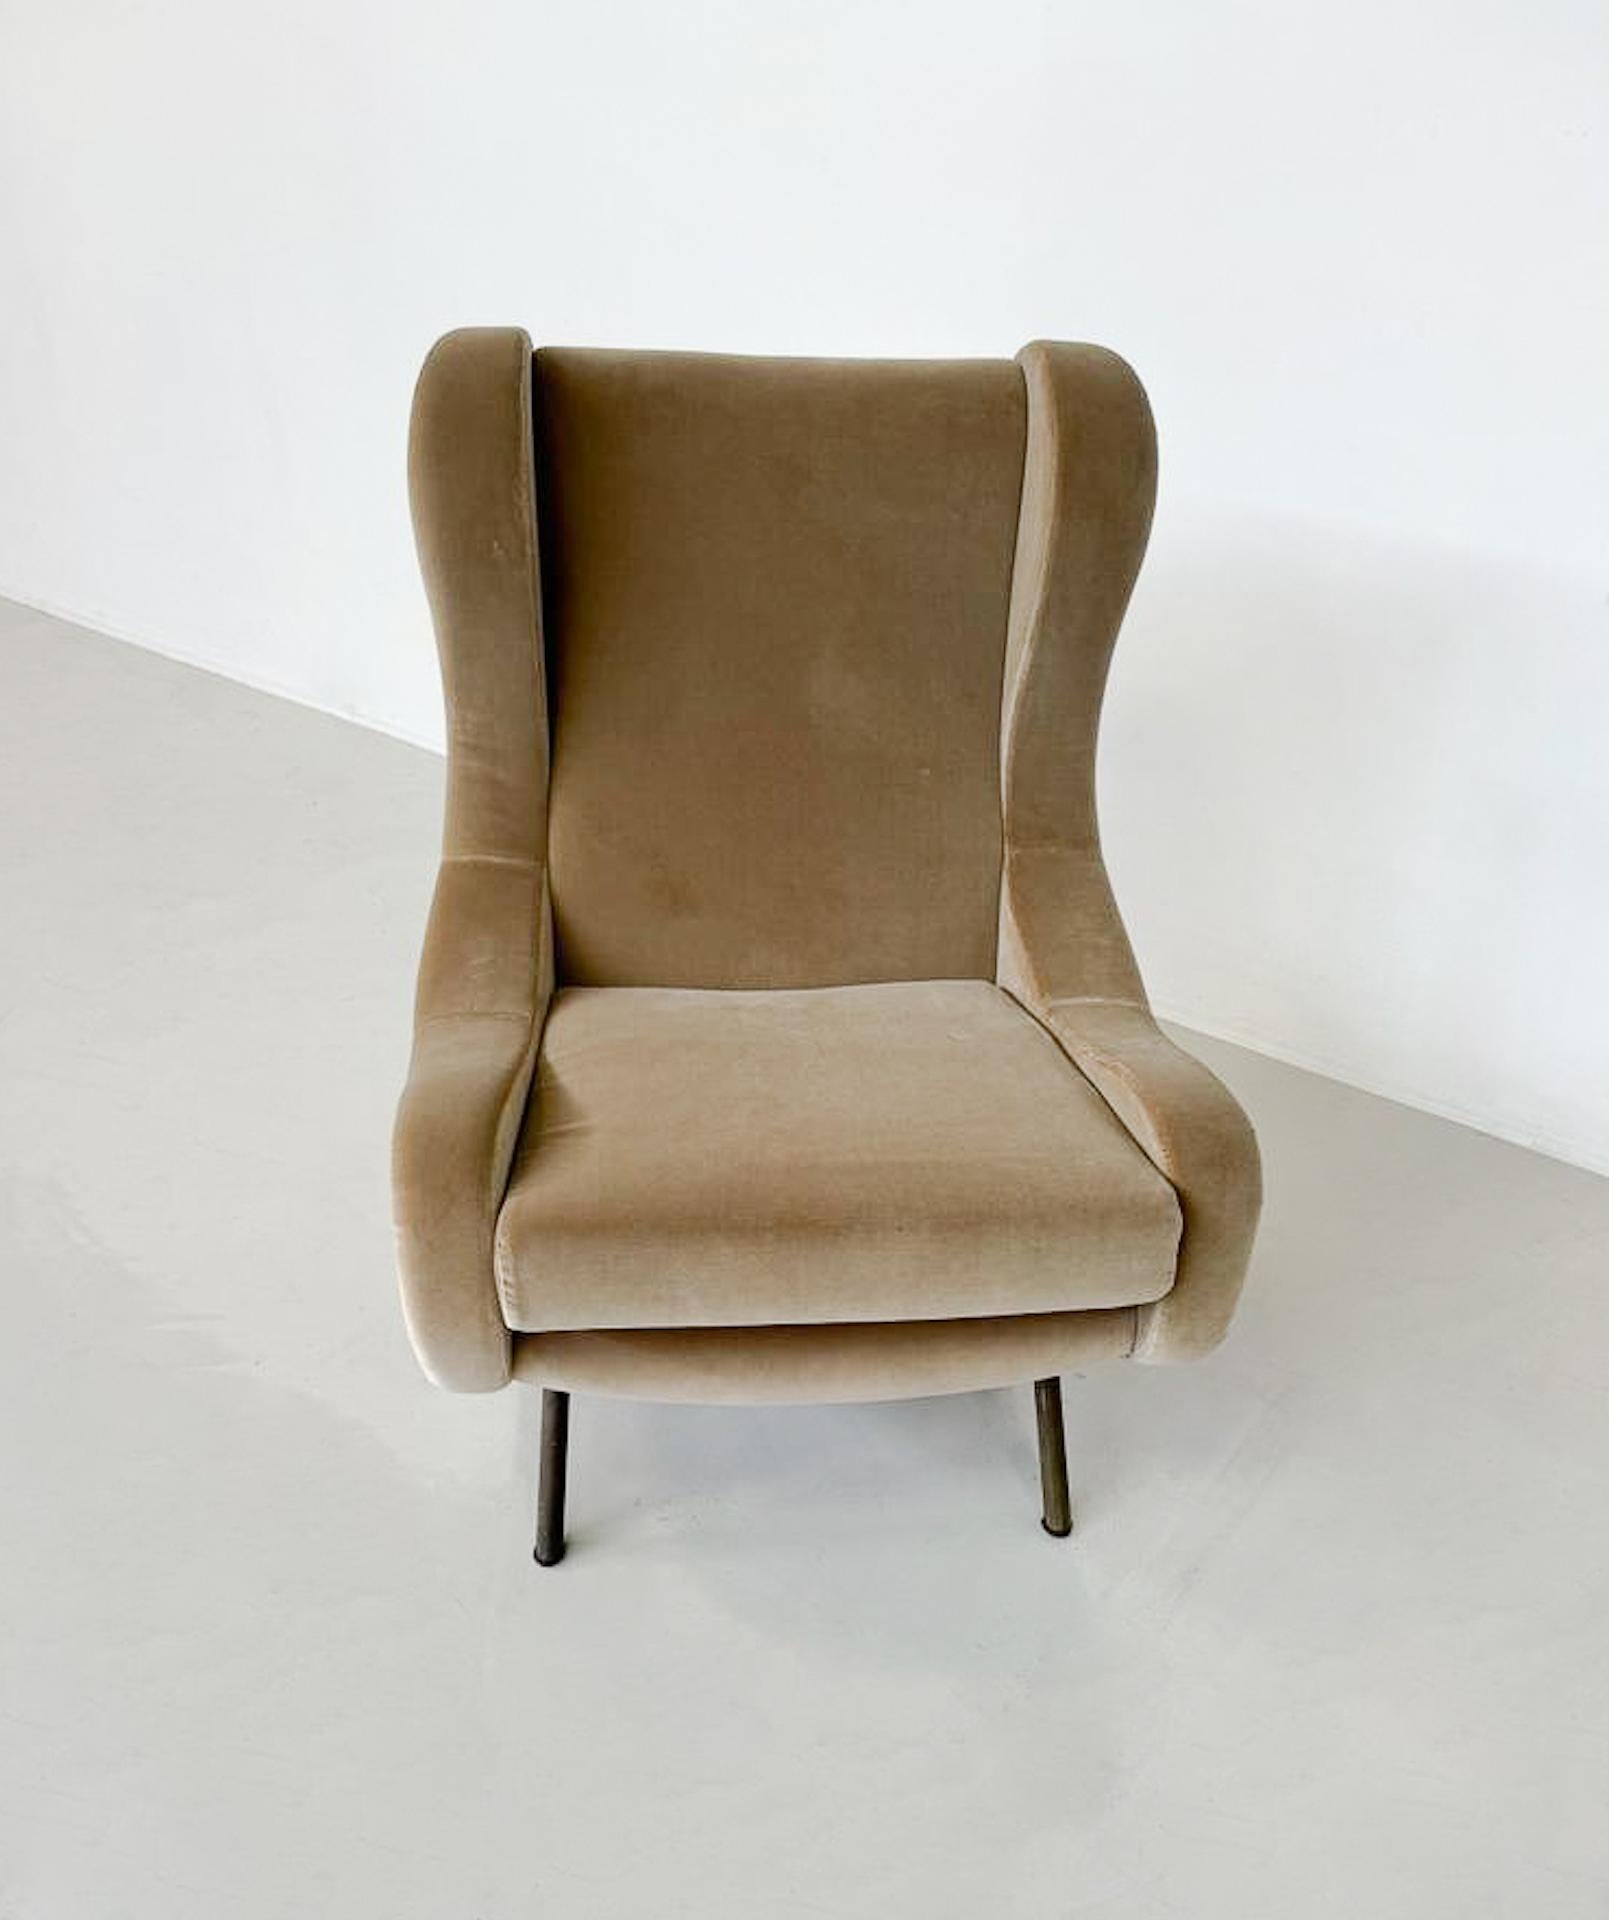 Fabric Mid-Century Modern Armchair by Marco Zanuso, Italy, 1960s - New Upholstery For Sale